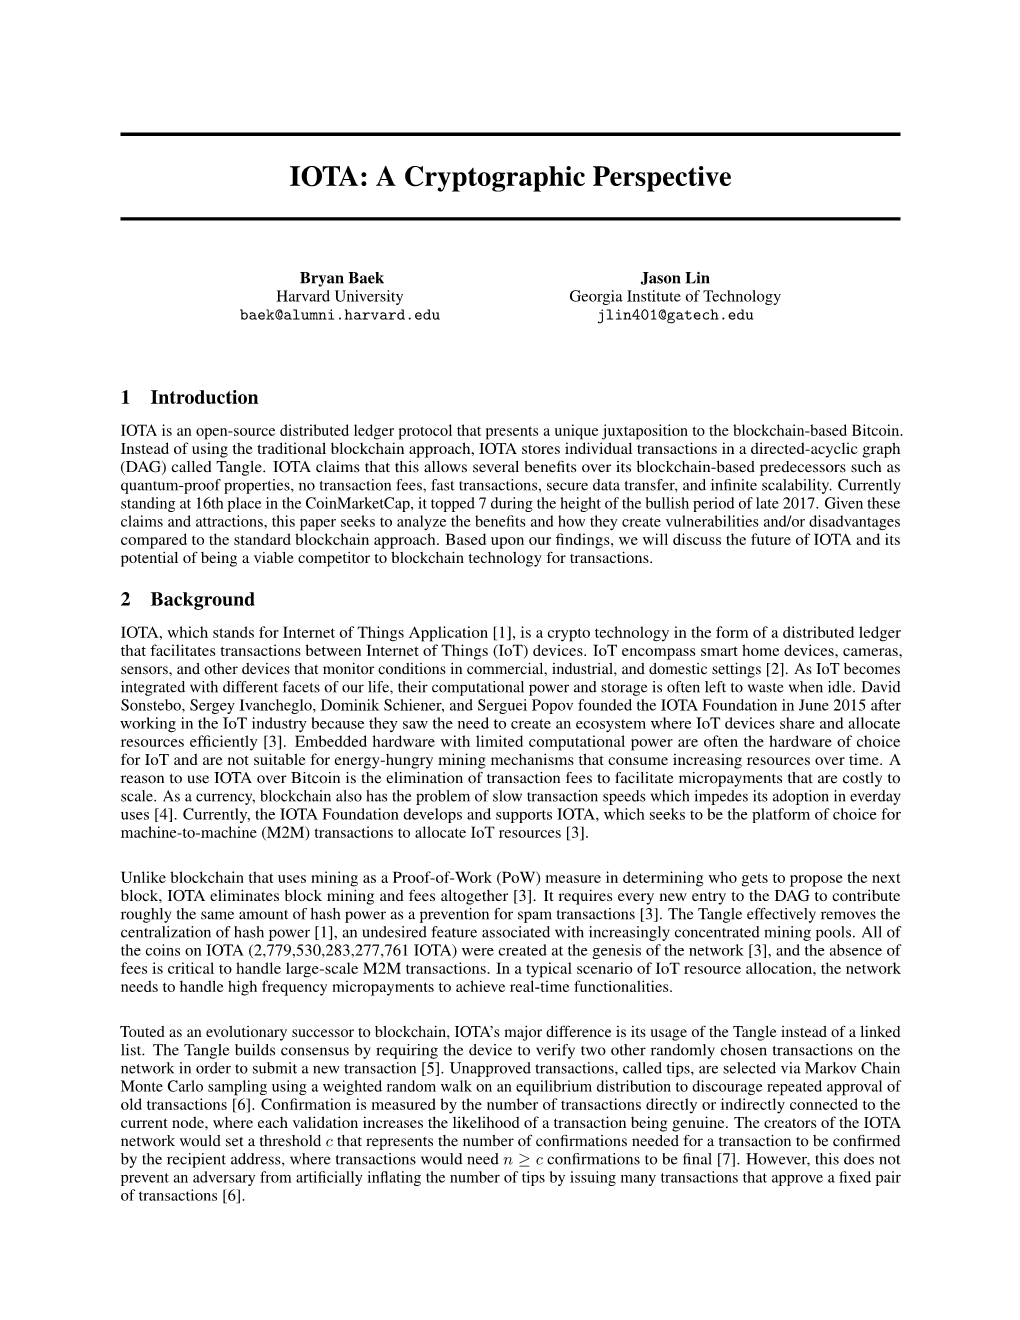 IOTA: a Cryptographic Perspective